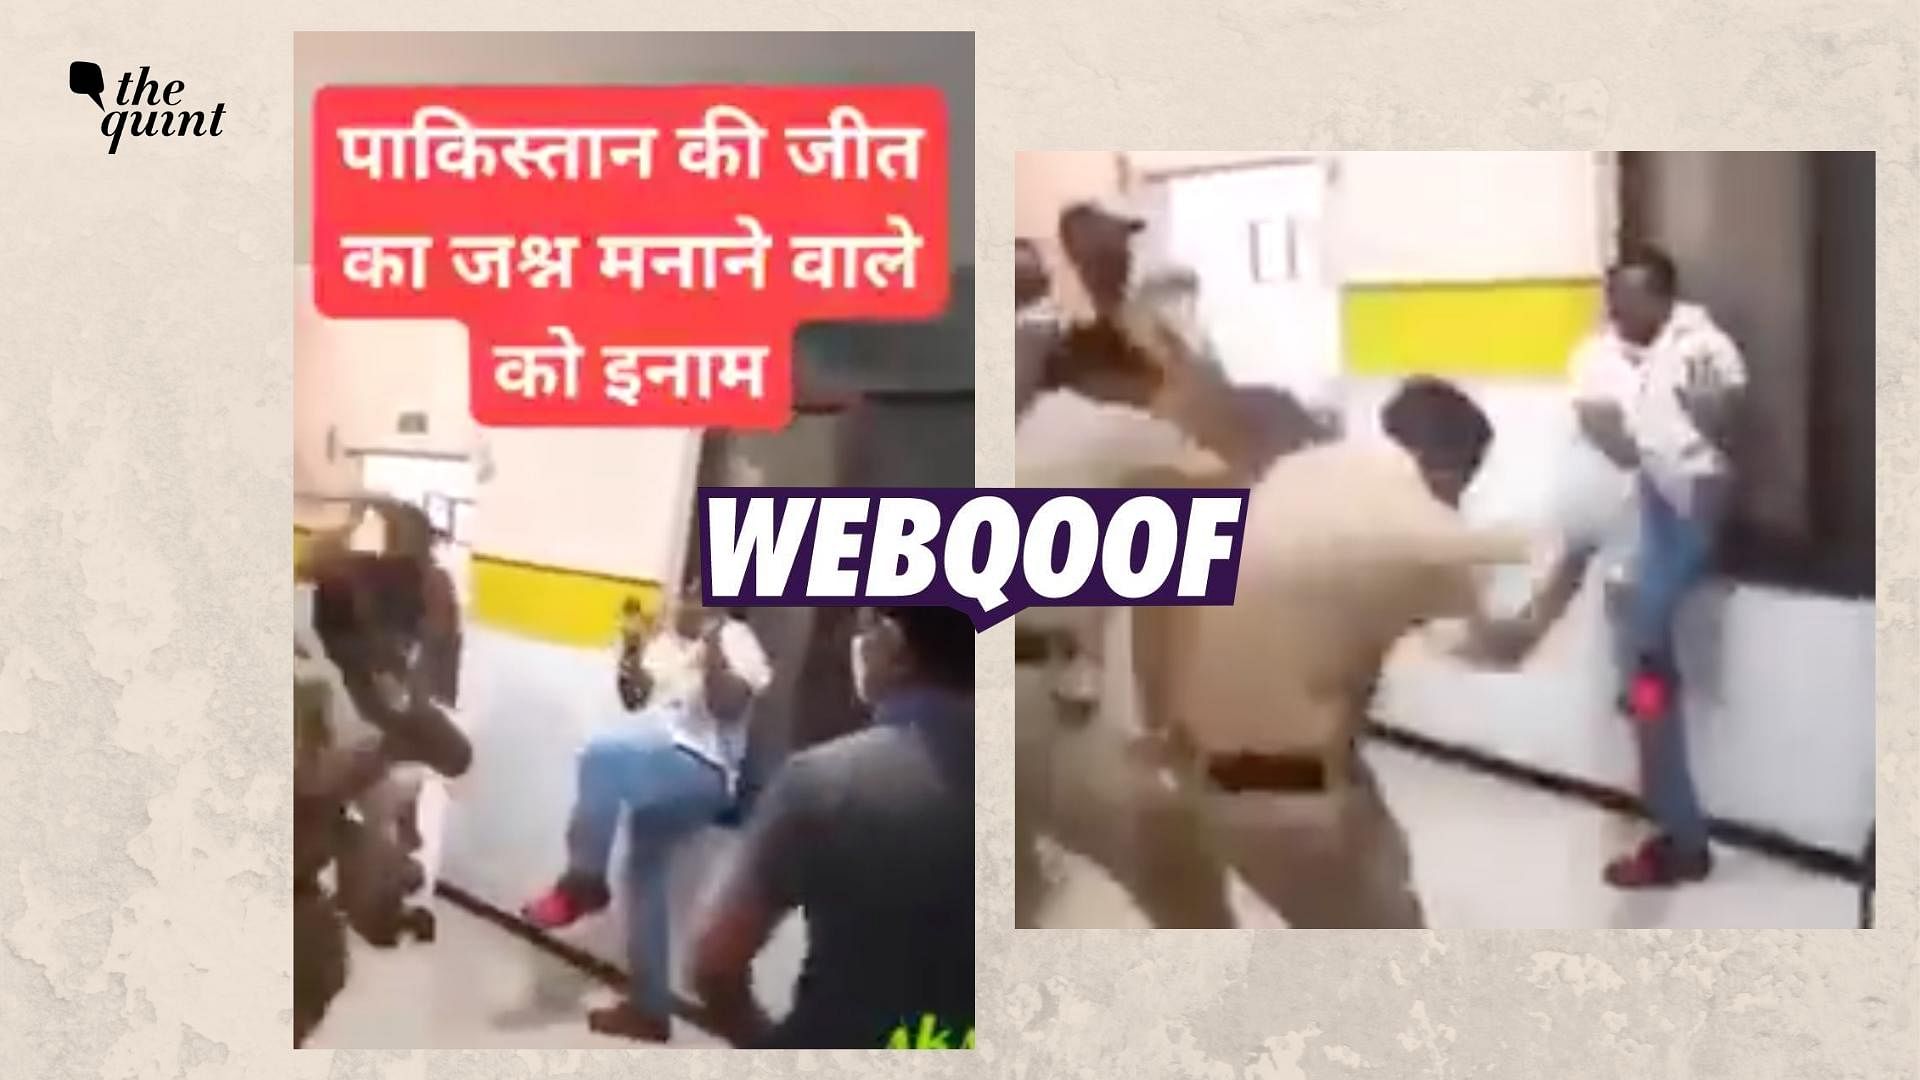 <div class="paragraphs"><p>The claim states that the video is from UP and shows a man being thrashed by cops for celebrating Pakistan's win.&nbsp;</p></div>